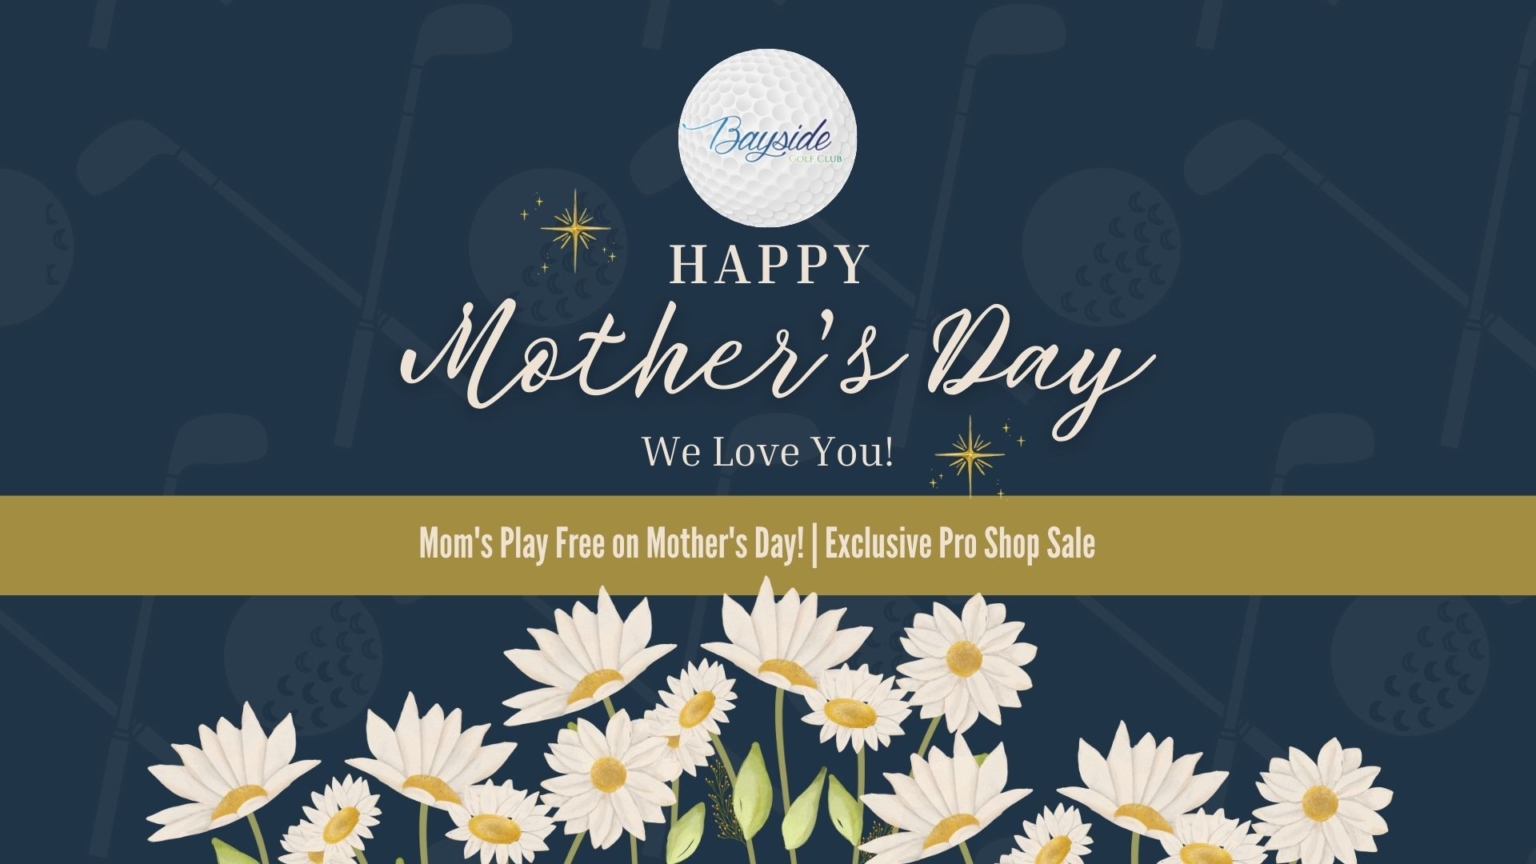 Mother's Day at Bayside! - Bayside Golf Club